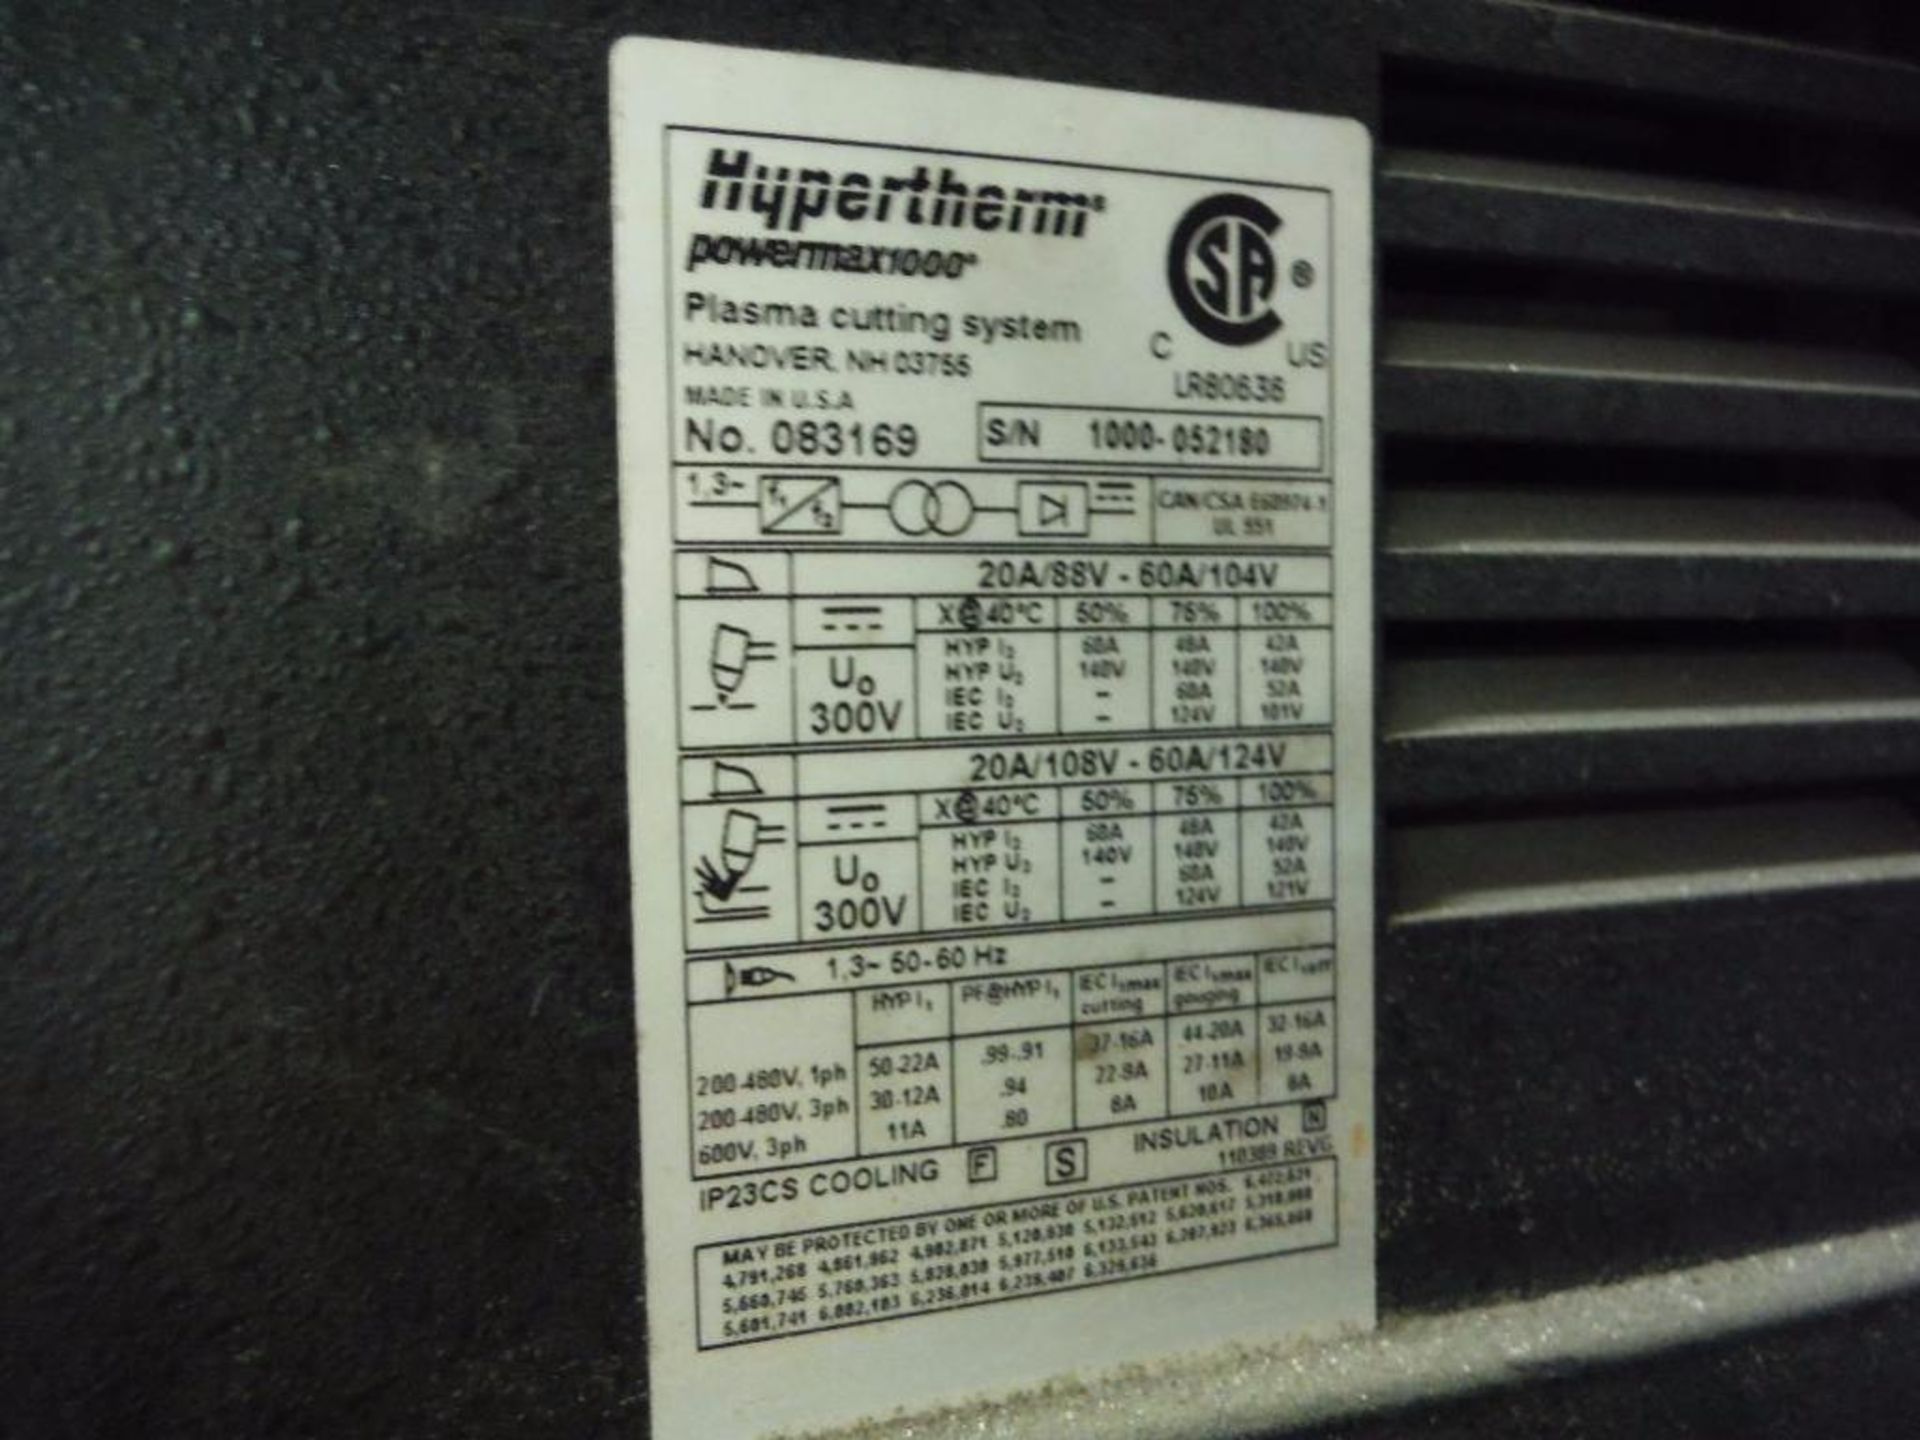 Hypotherm powermax1000 plasma cutter ** Rigging Fee: $15 ** - Image 6 of 7